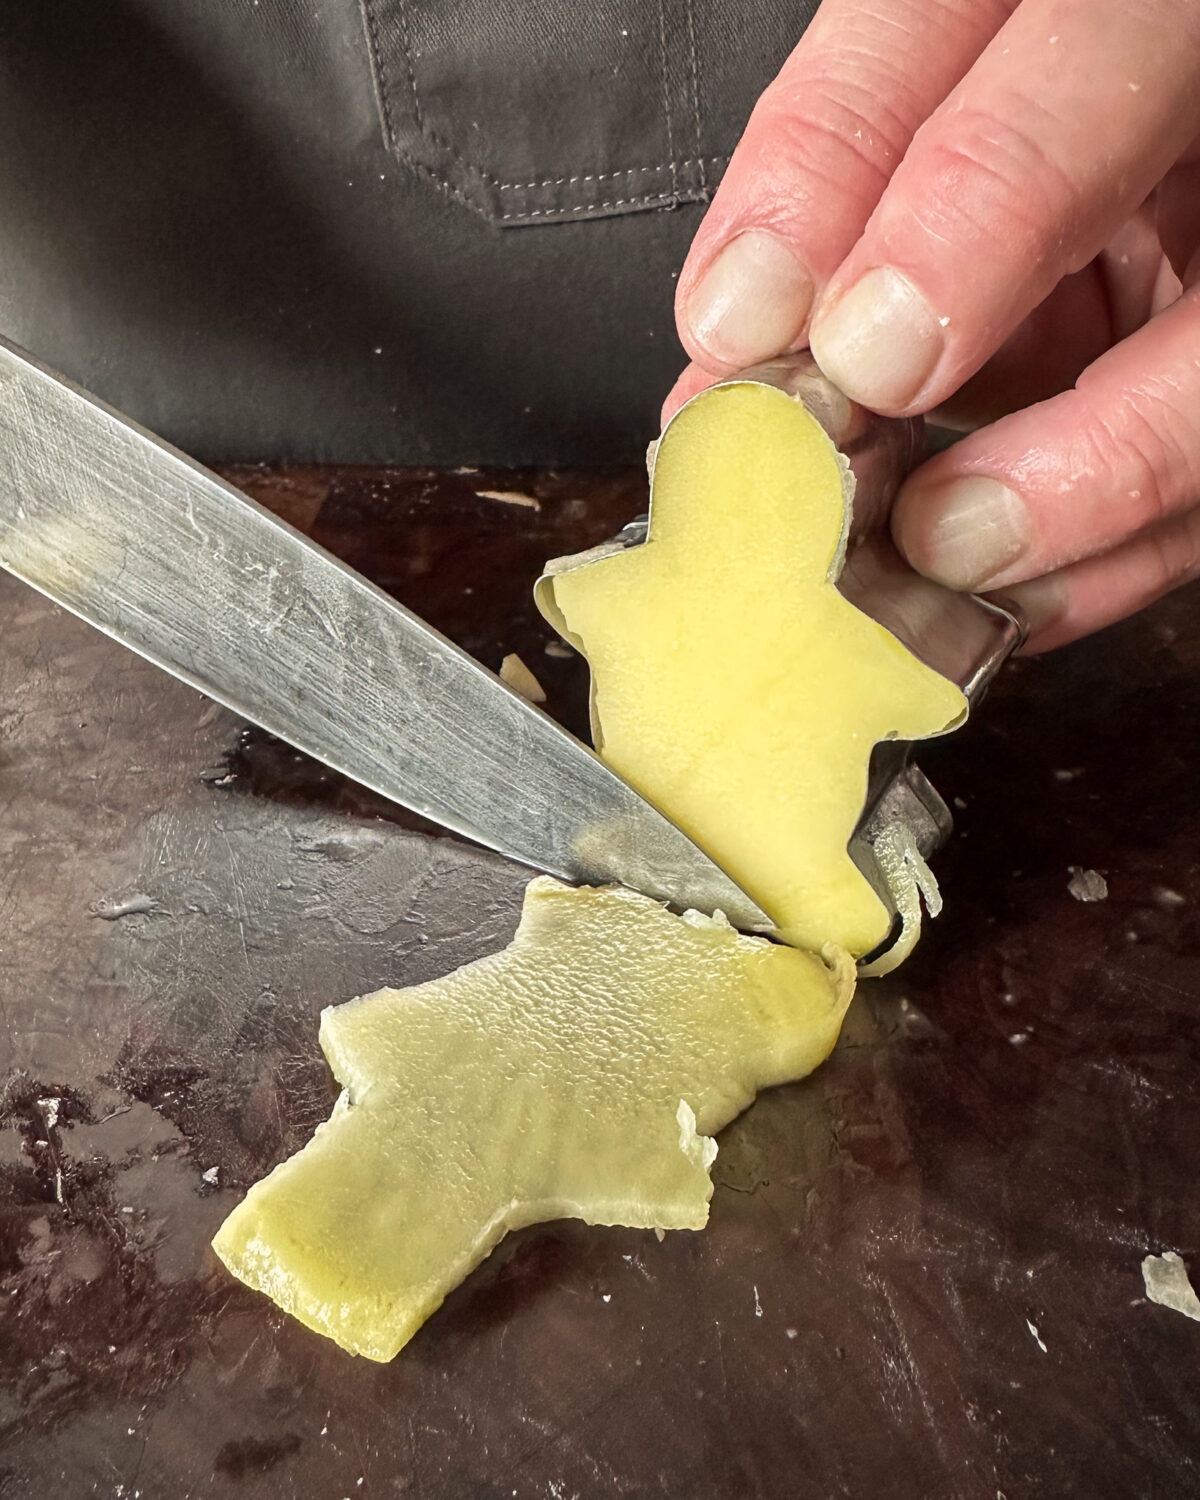 Stand up the gingerbread person and with a sharp knife, carefully slice down both sides of the cutter.